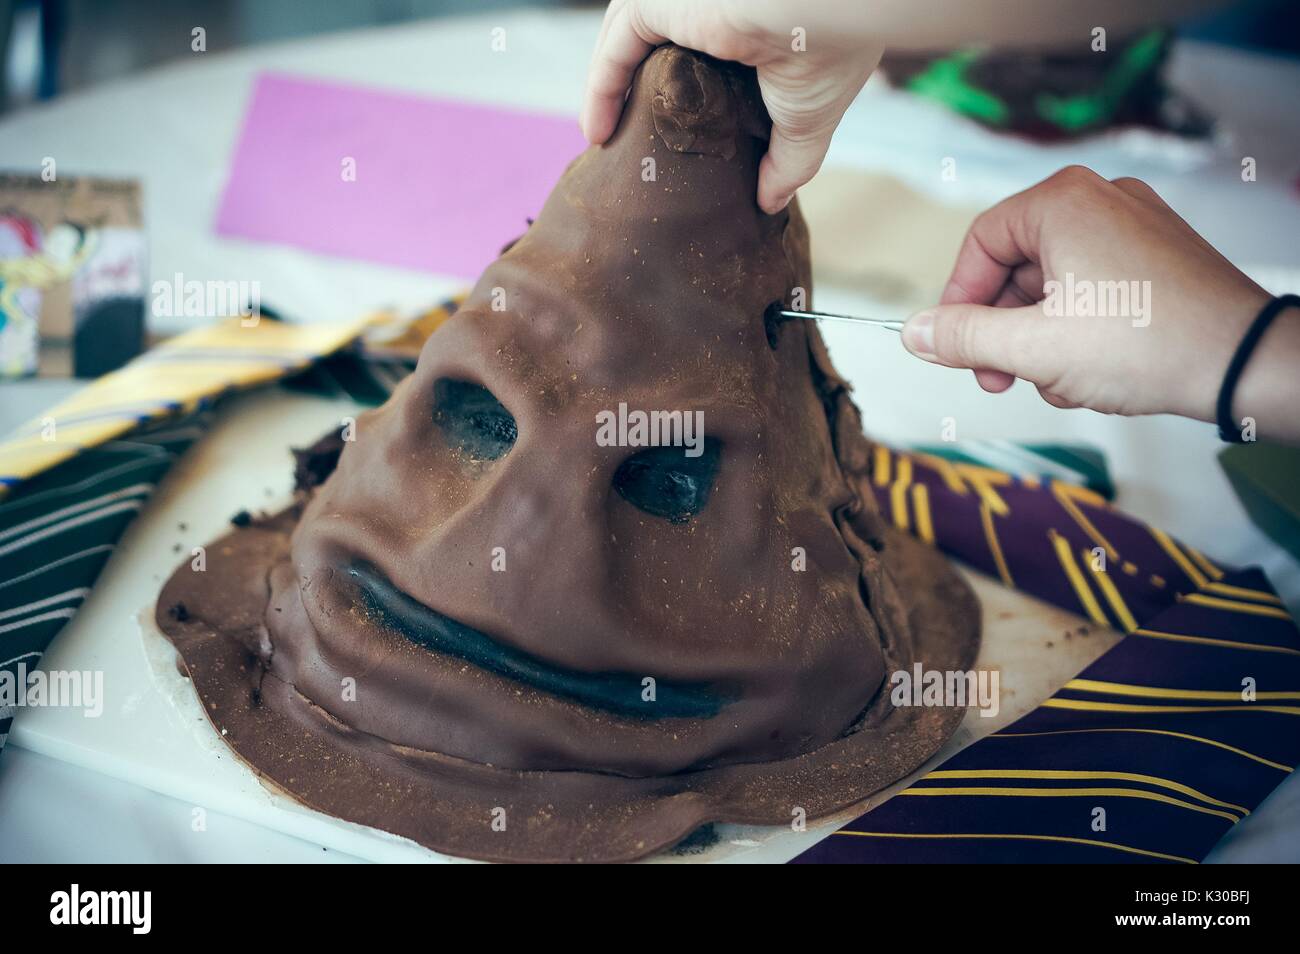 An undergraduate college student cuts her Harry Potter cake during Johns Hopkins University's annual 'Read It And Eat It' Edible Book Festival on the Homewood campus in Baltimore, Maryland, 2016. Courtesy Eric Chen. Stock Photo